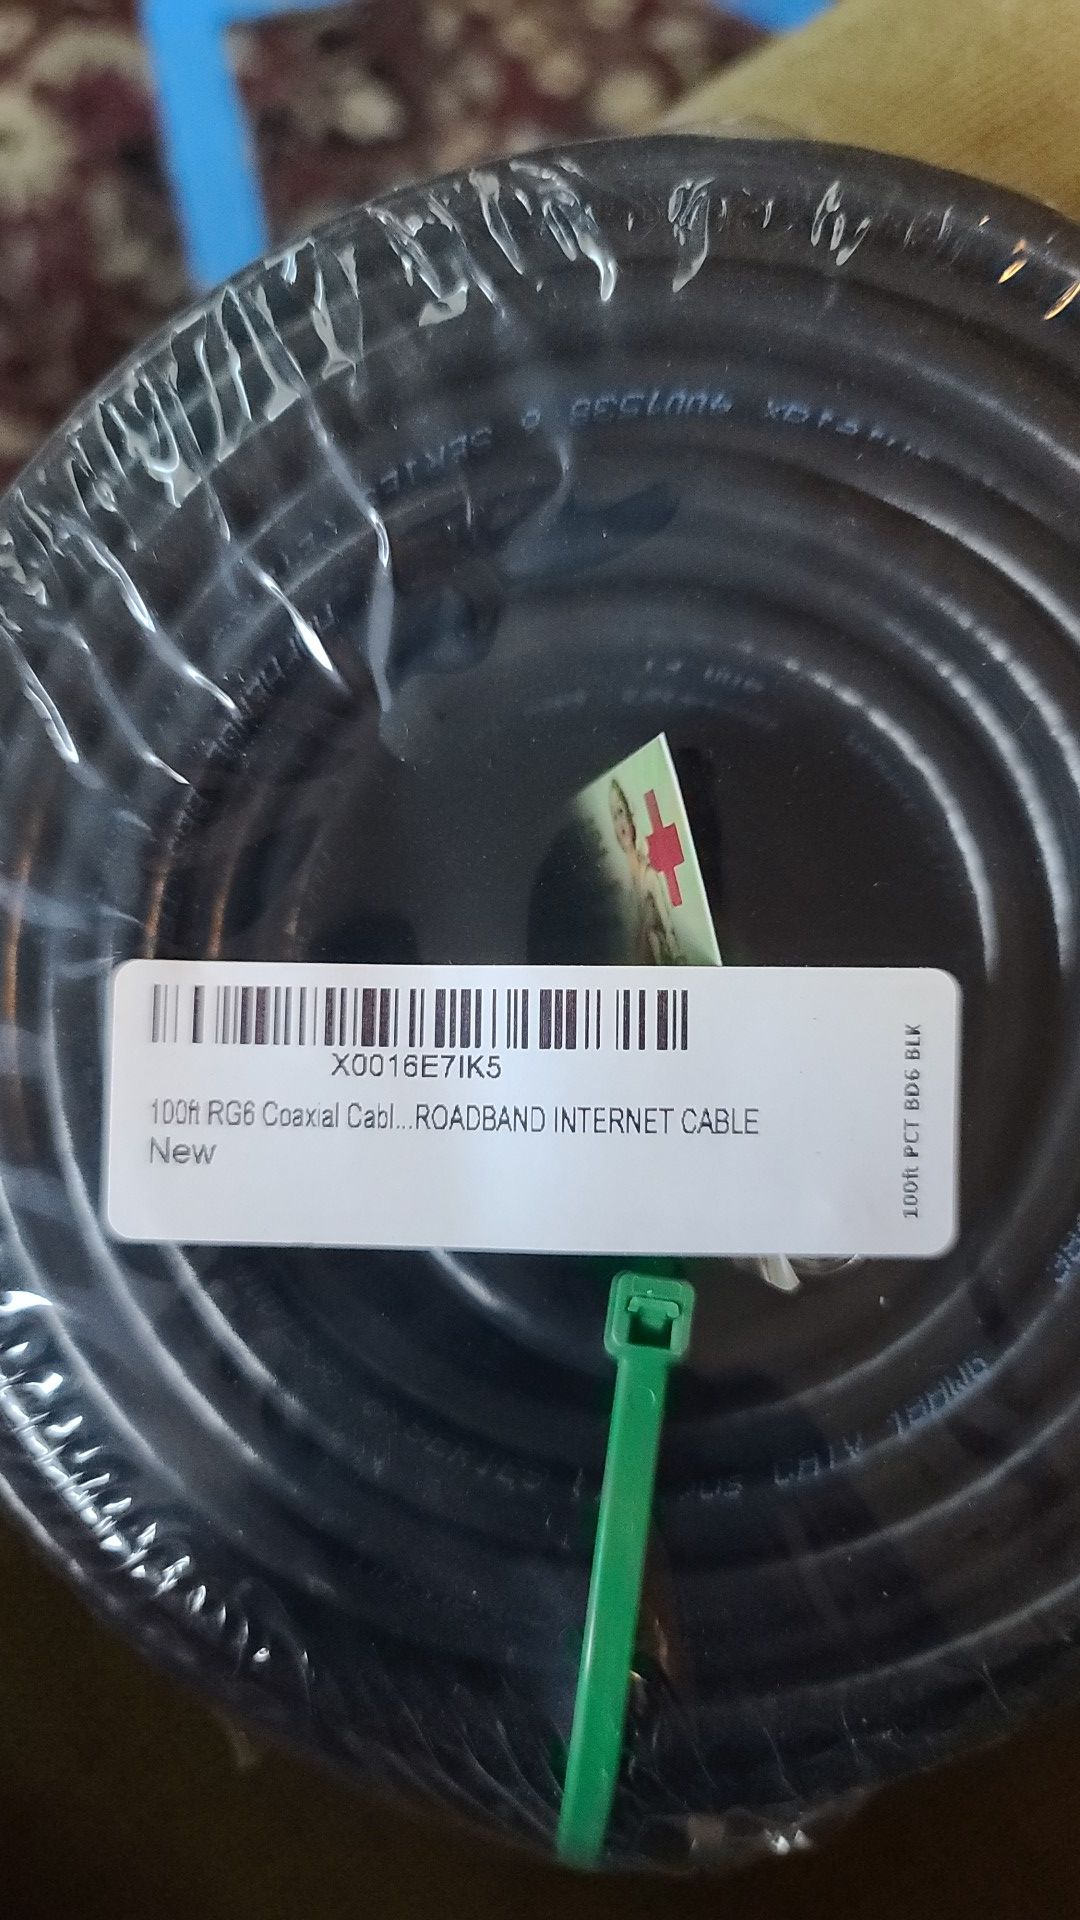 100ft RG6 coax cable. New in packaging.